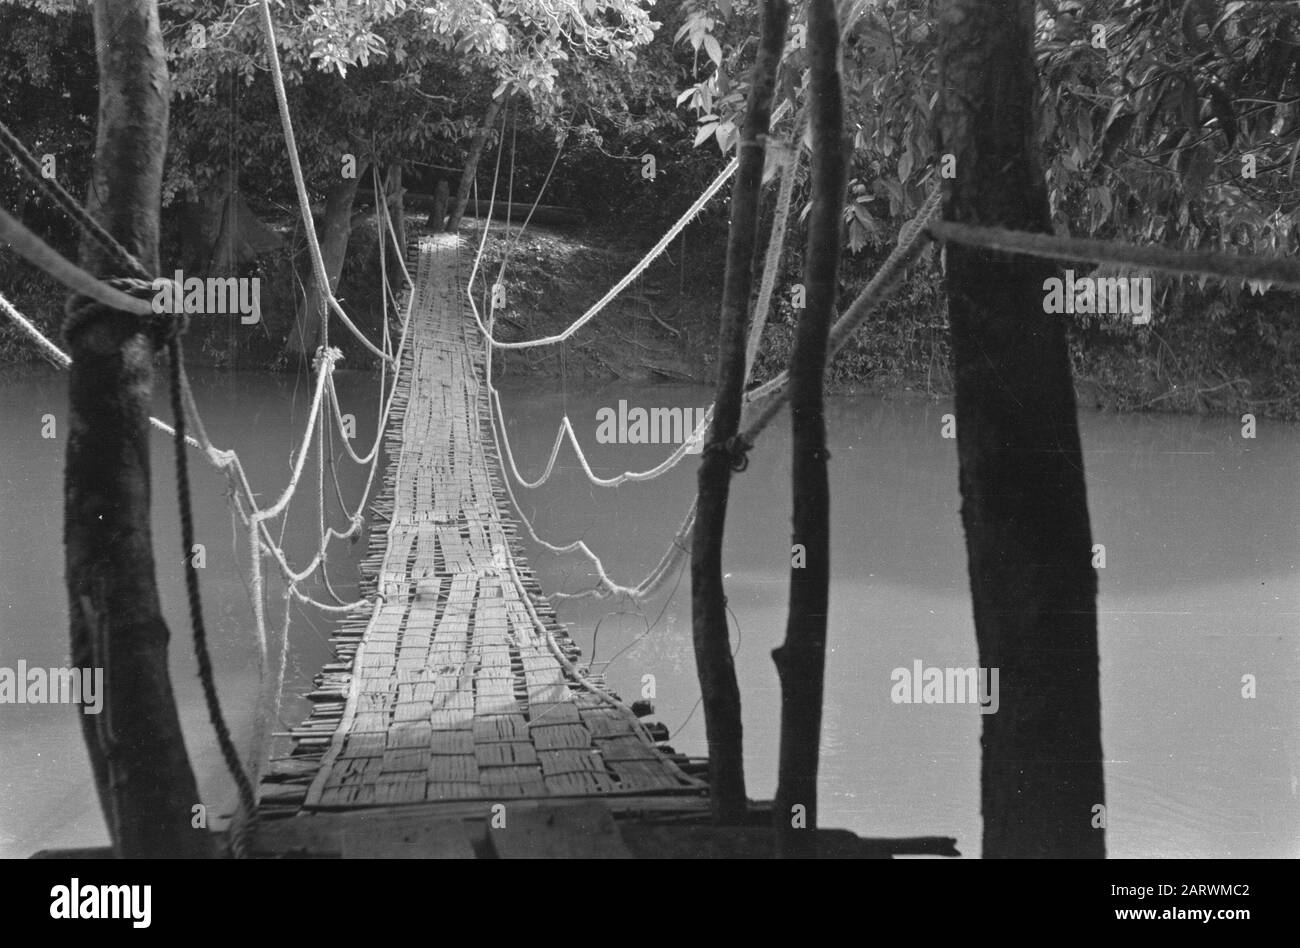 Shock troops at Praboemoelih  Talang Djimar (at Praboemoelih): The Wilhelmina Bridge, a suspension bridge, by the infantrymen of the 3rd section, 2nd platoon of 1-7 R.S. from bamboo constructed. On 31 August 1947, this bridge was opened over the Ajer Rambangi near Prabamoelih. Date: 23 October 1947 Location: Indonesia, Dutch East Indies, Sumatra Stock Photo